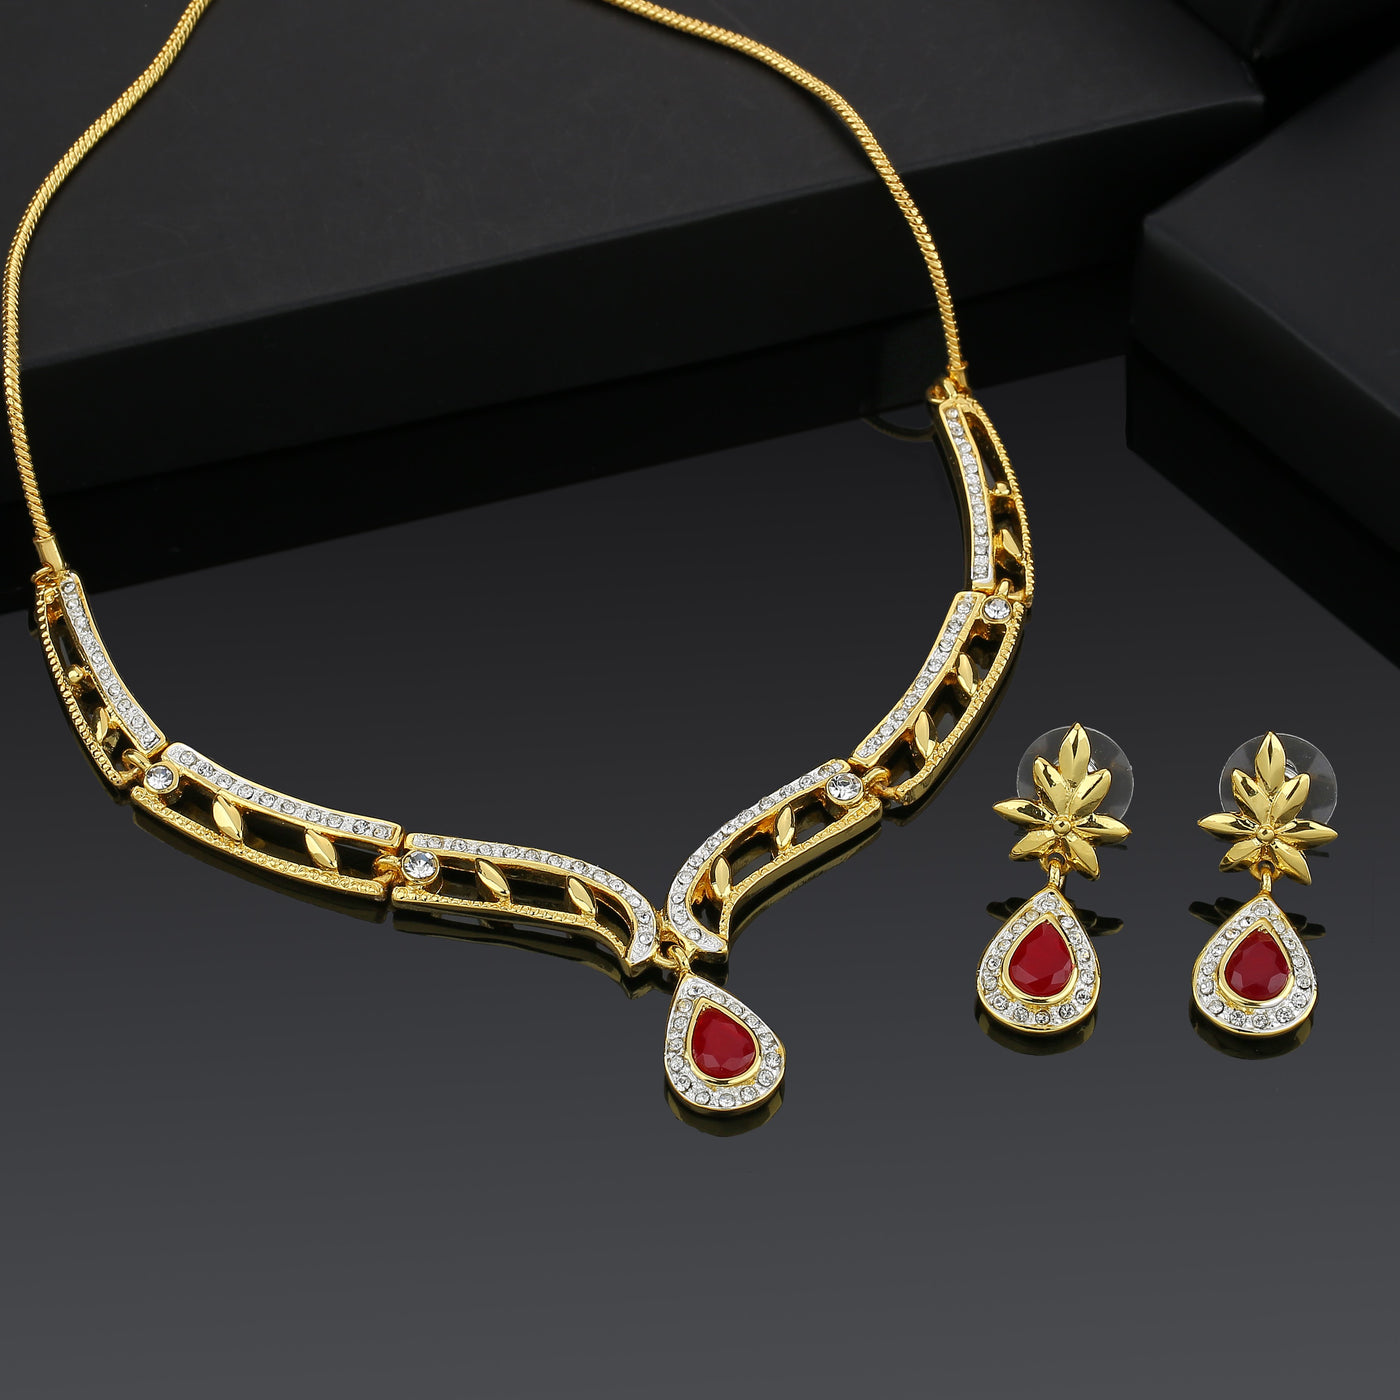 Estele 24 CT gold plated american diamond and ruby Necklace Set for Women